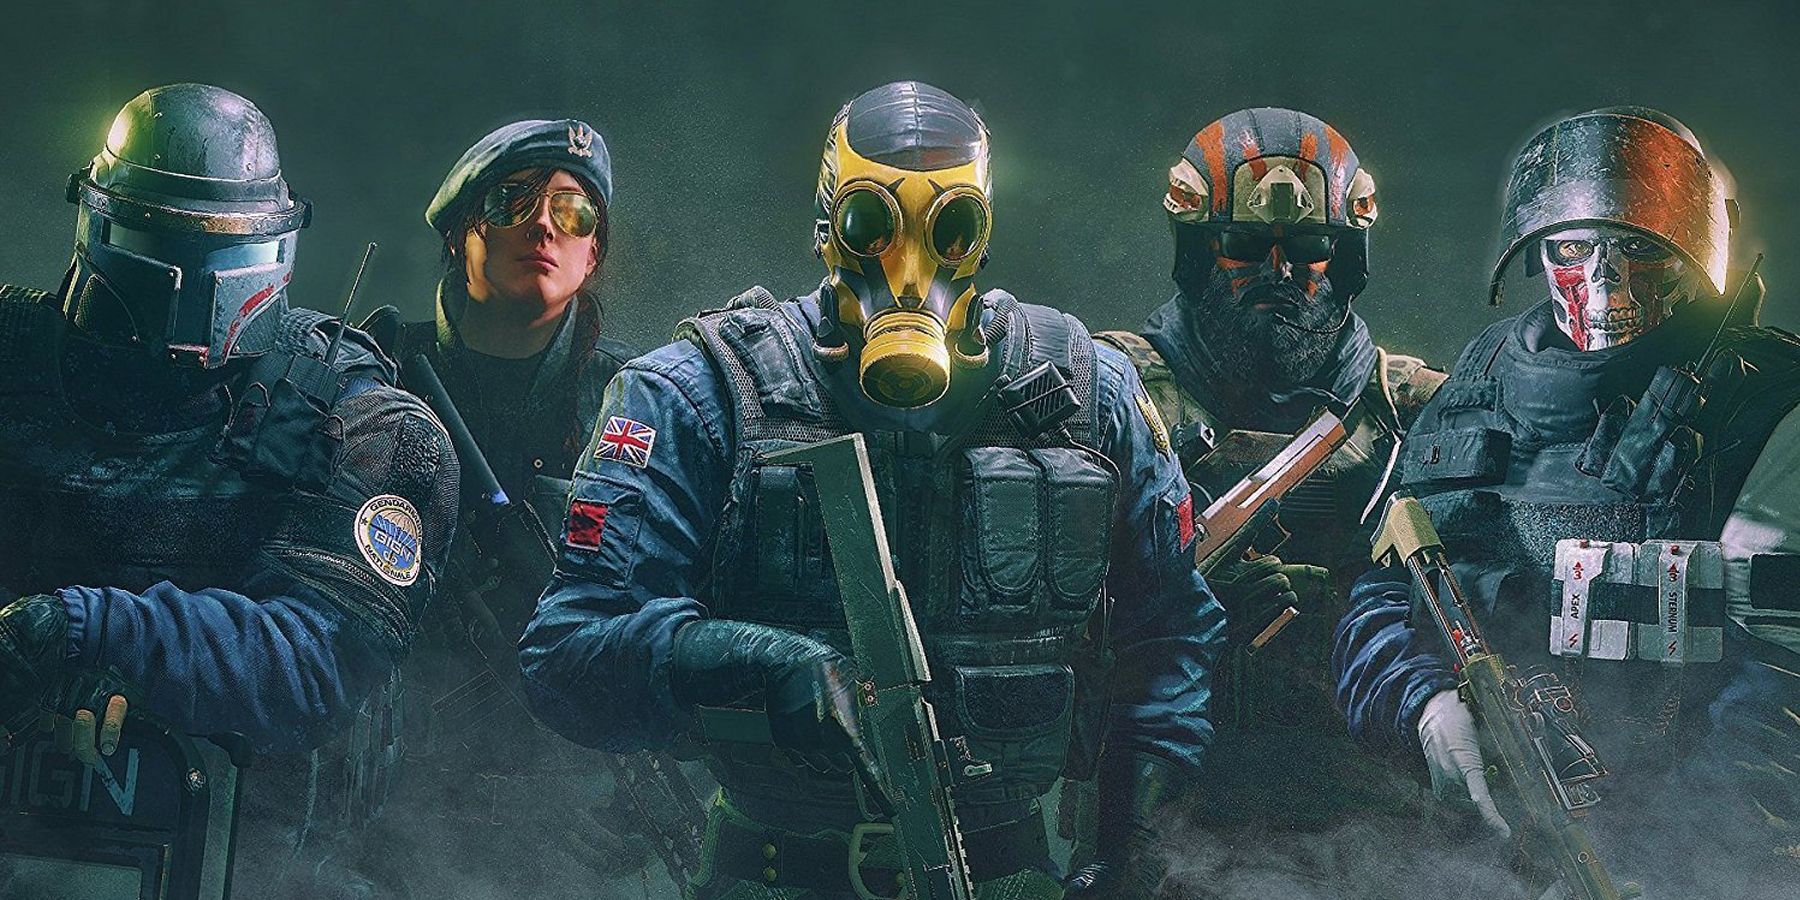 Operators from Rainbow Six Siege. From left to right: Montagne, Ash, Smoke, Blackbeard, and Doc.